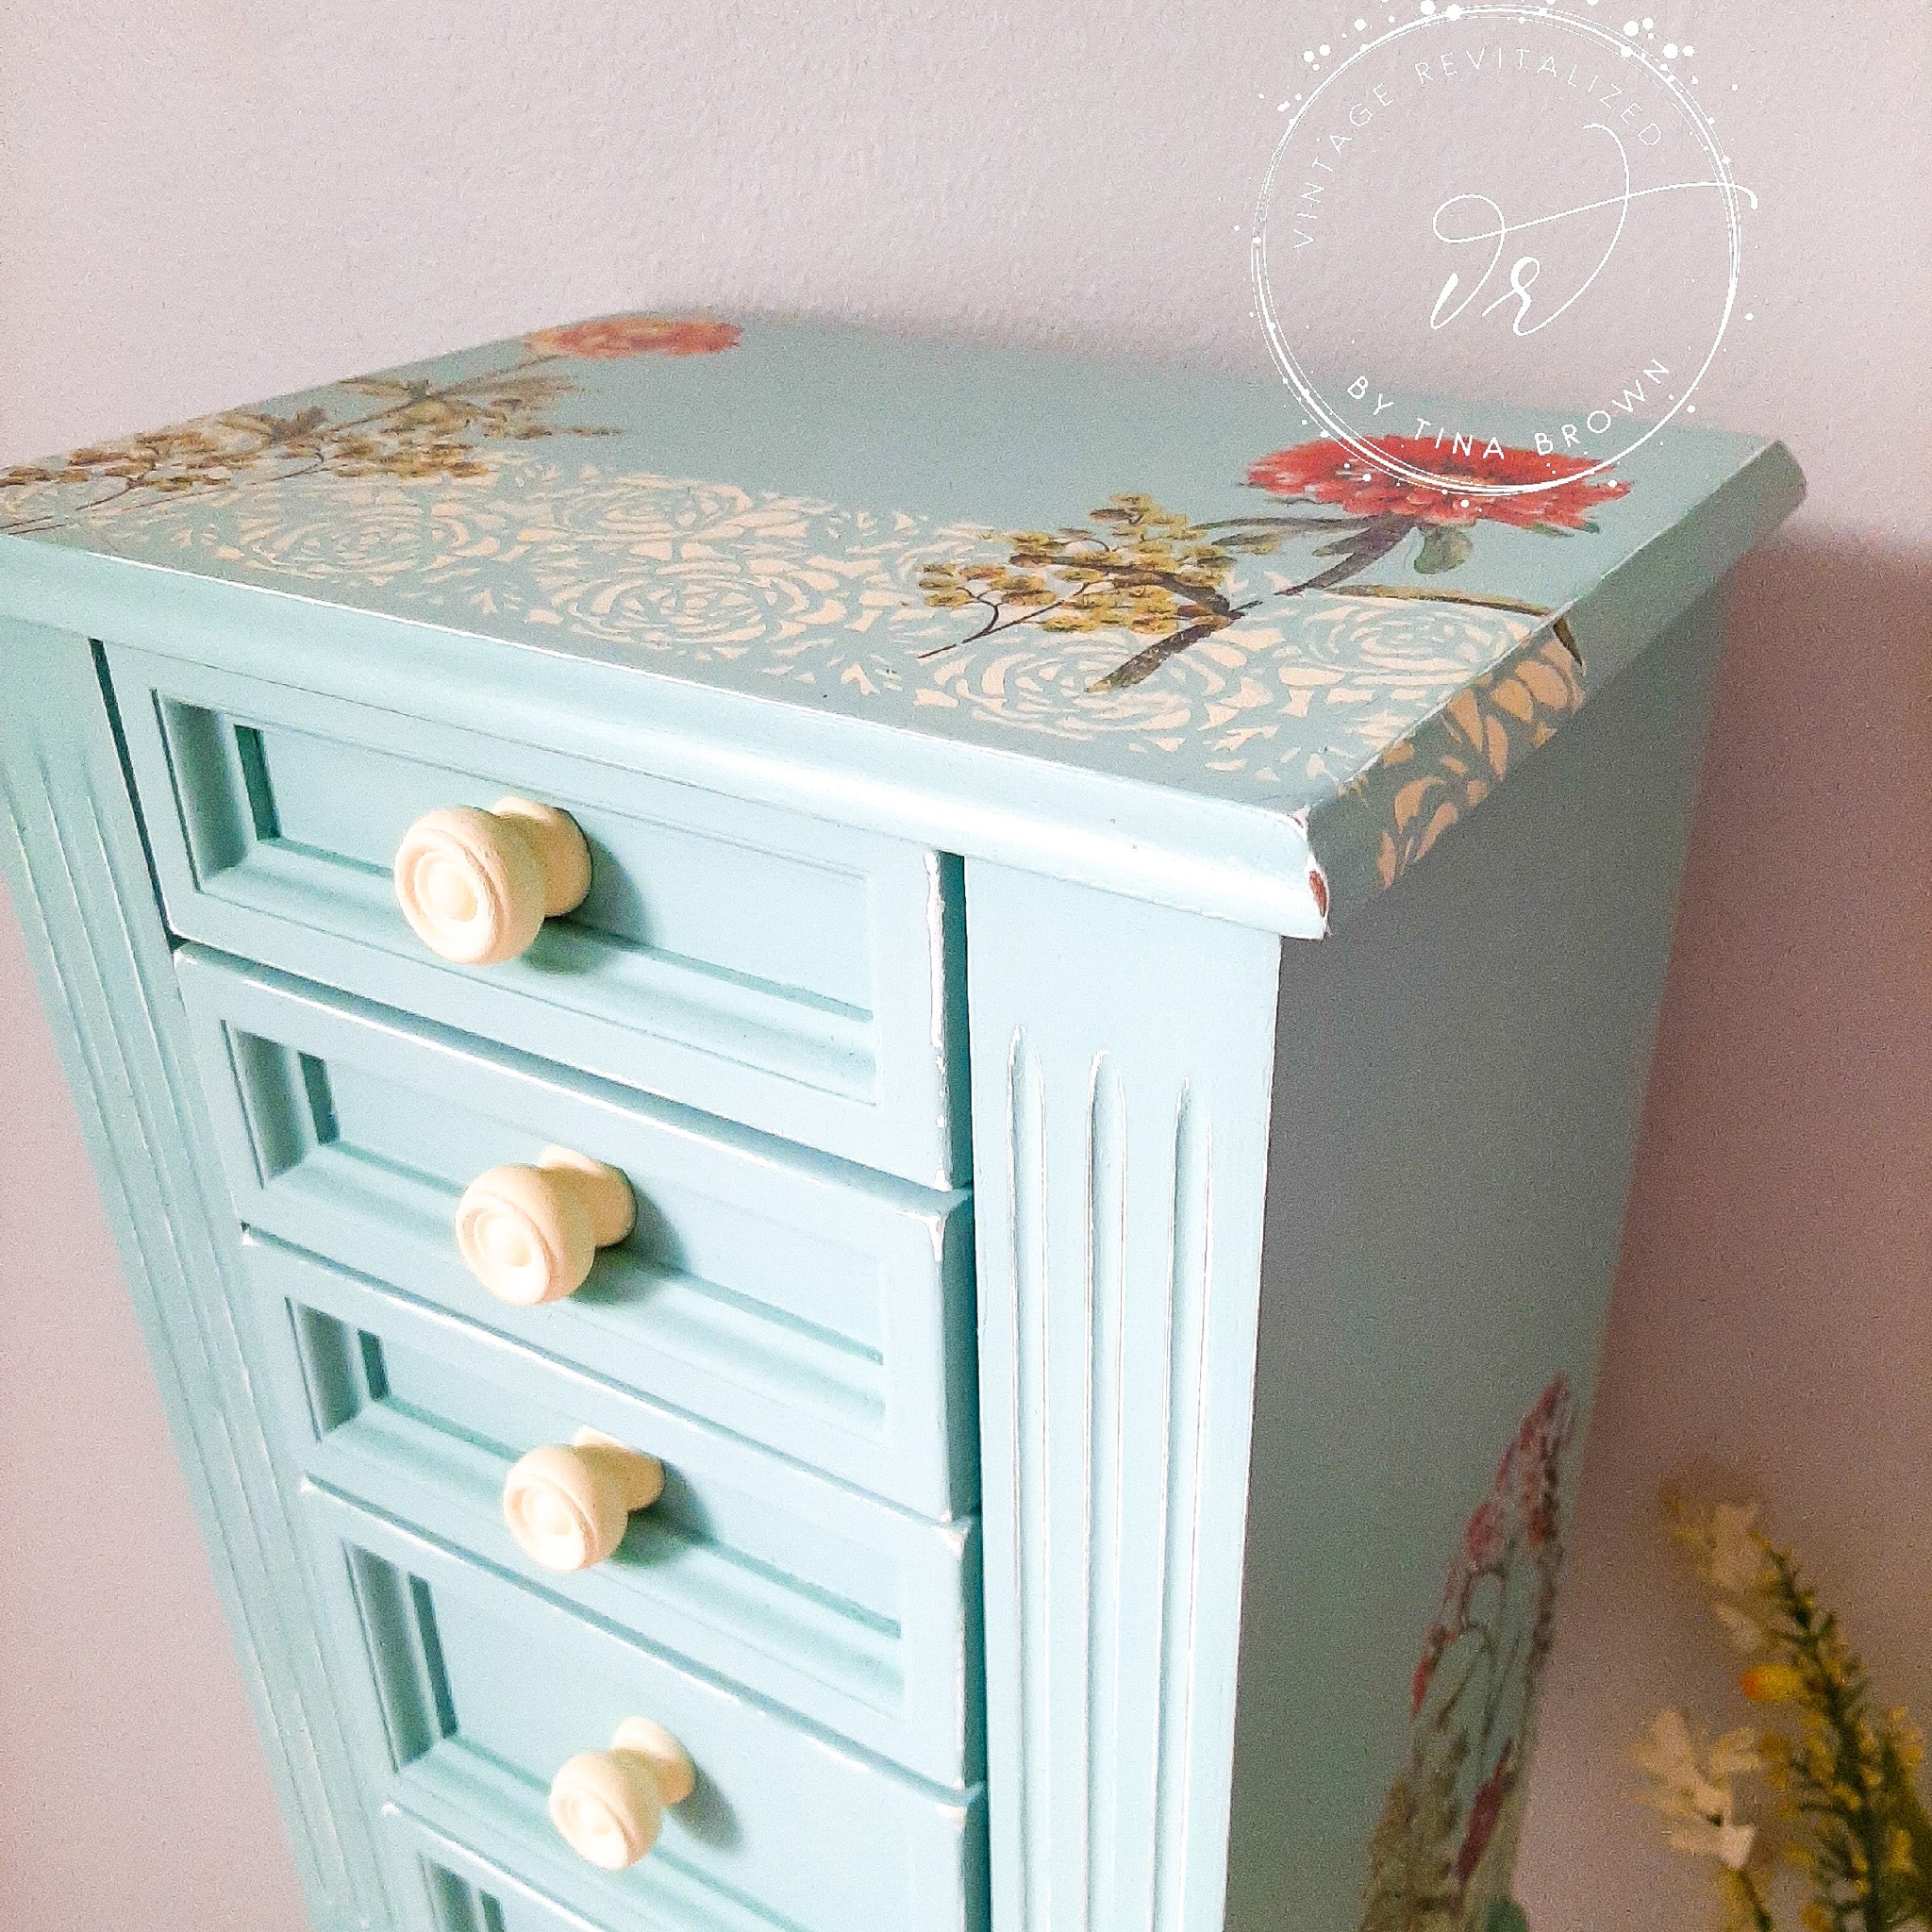 A vintage standing jewlery armoire refubrished by Vintage Revitalized by Tina Brown is painted in Dixie Belle's Sea Glass chalk mineral paint.